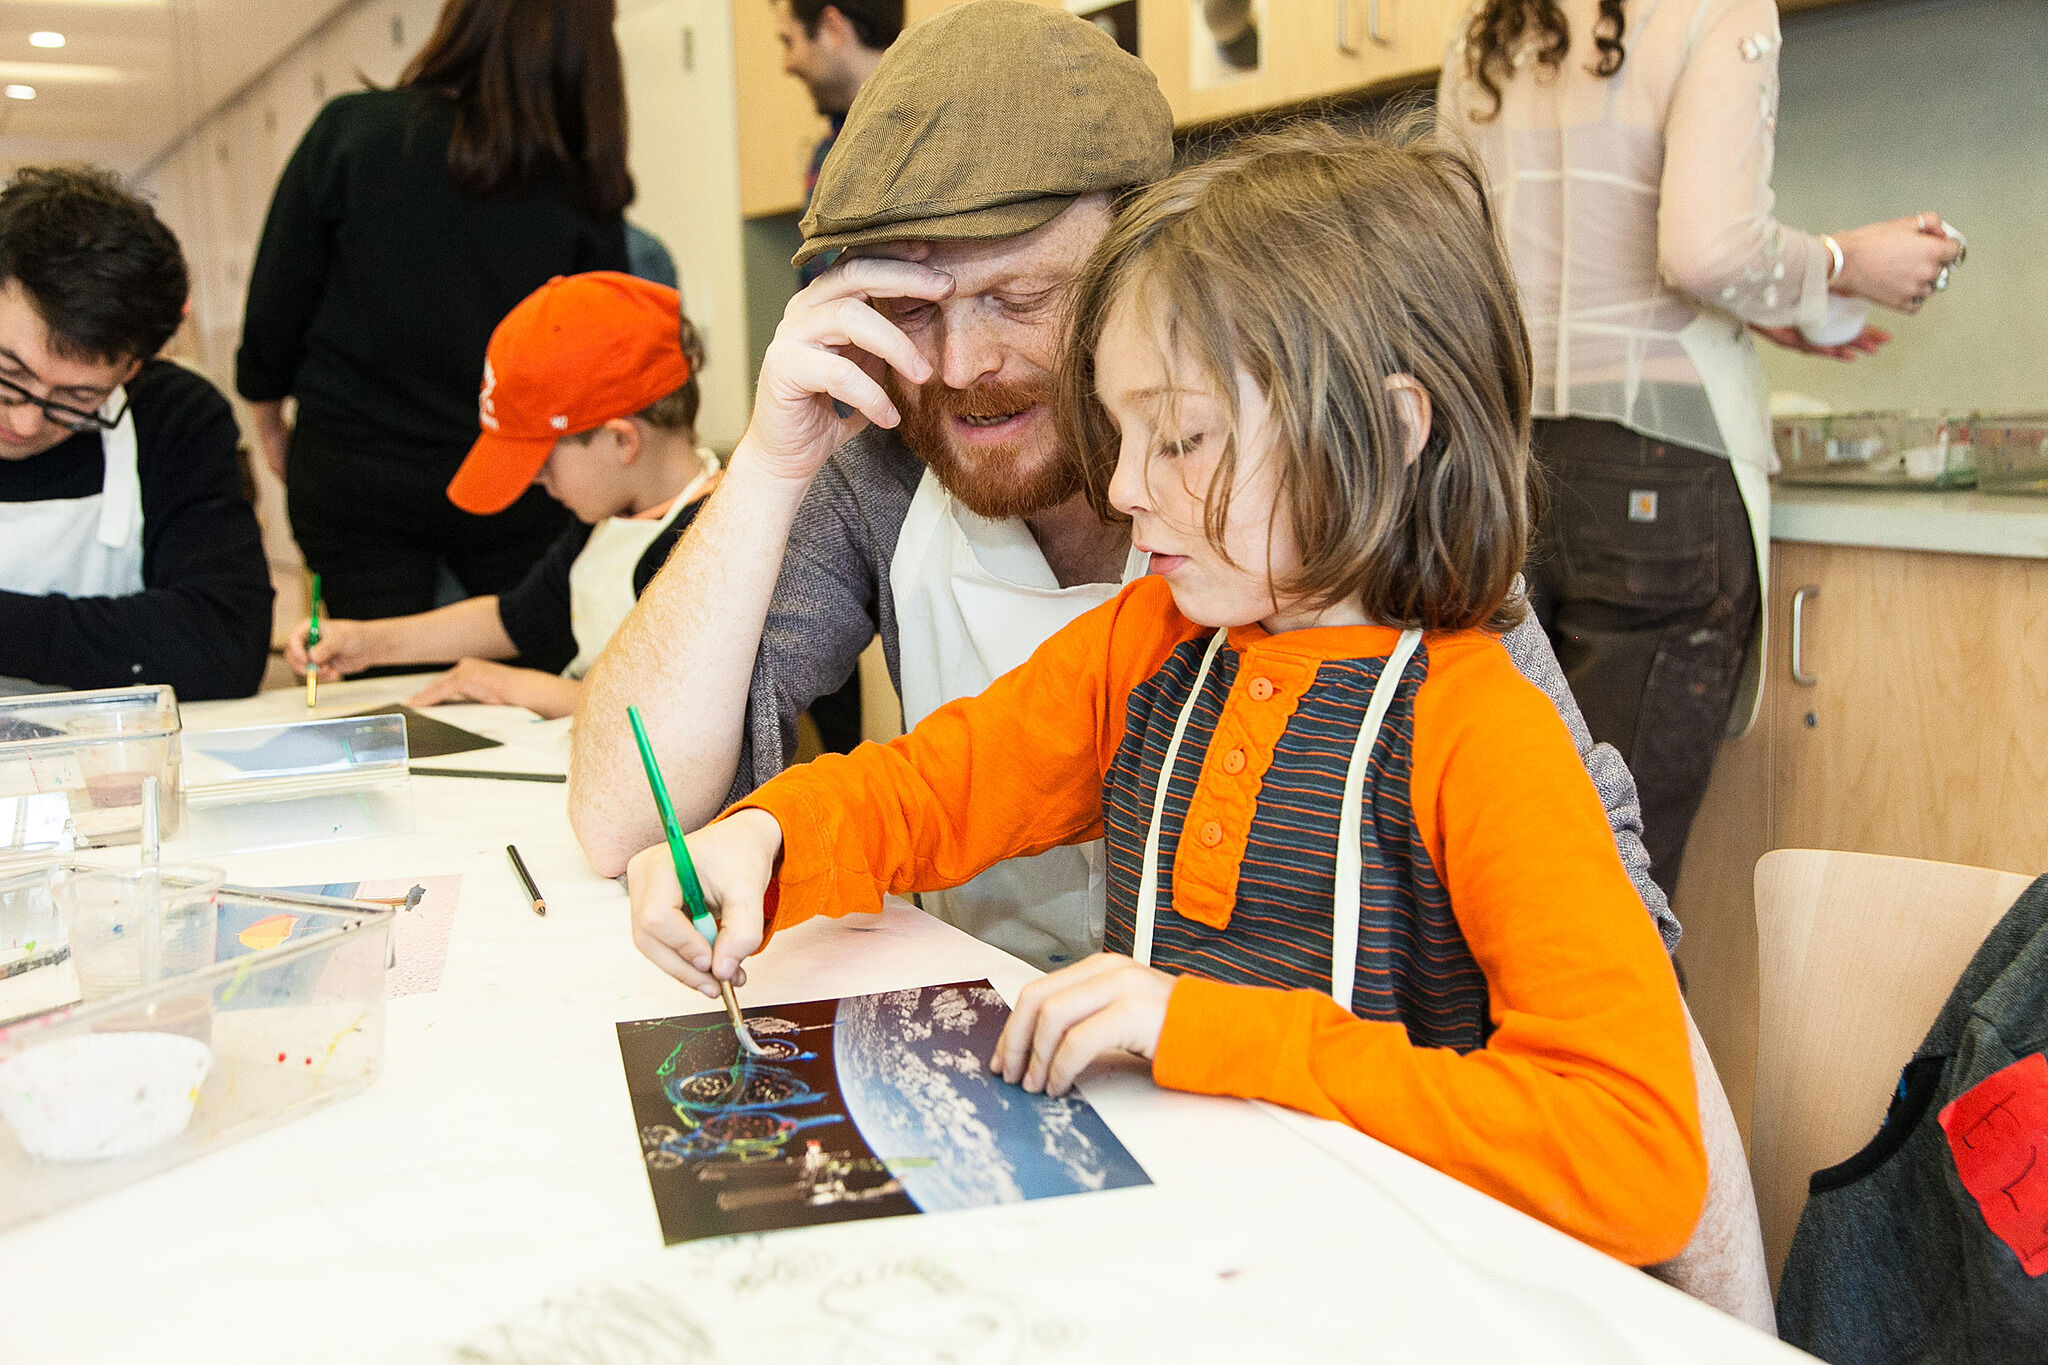 A father and child work on a painting together